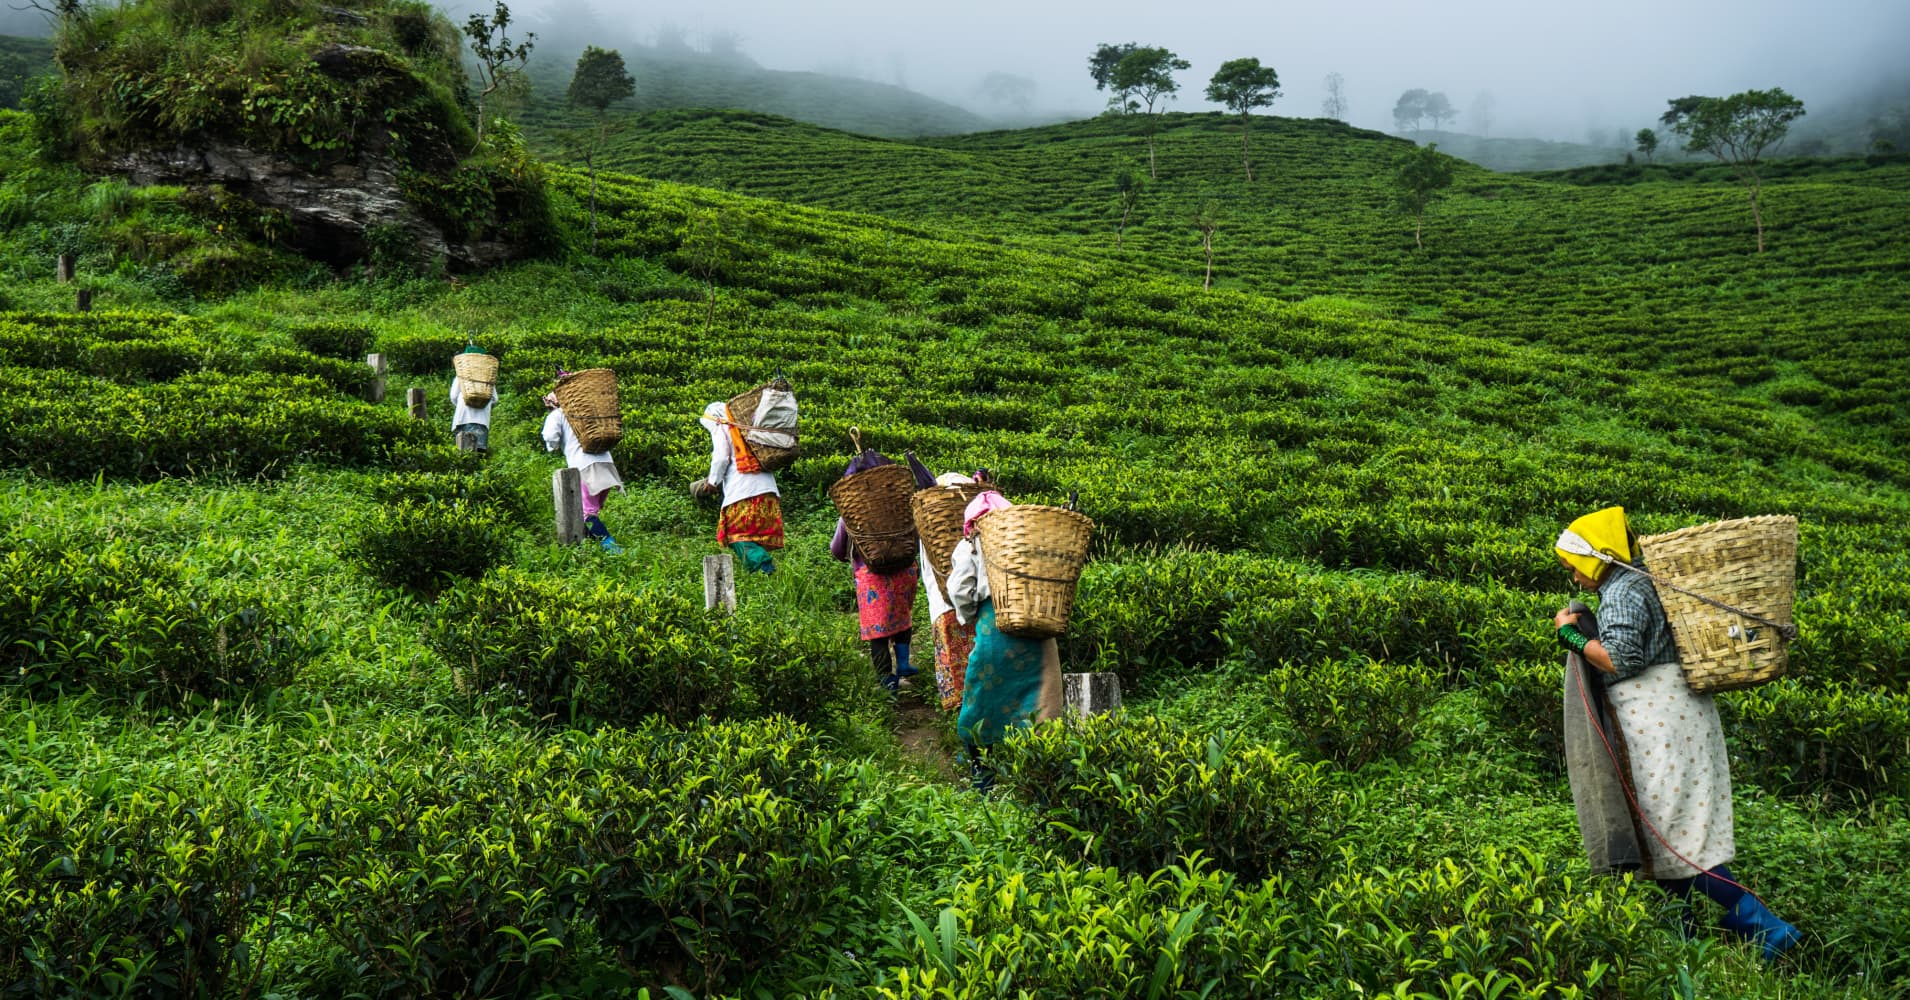 Climate change sparks tension in India's tea gardens